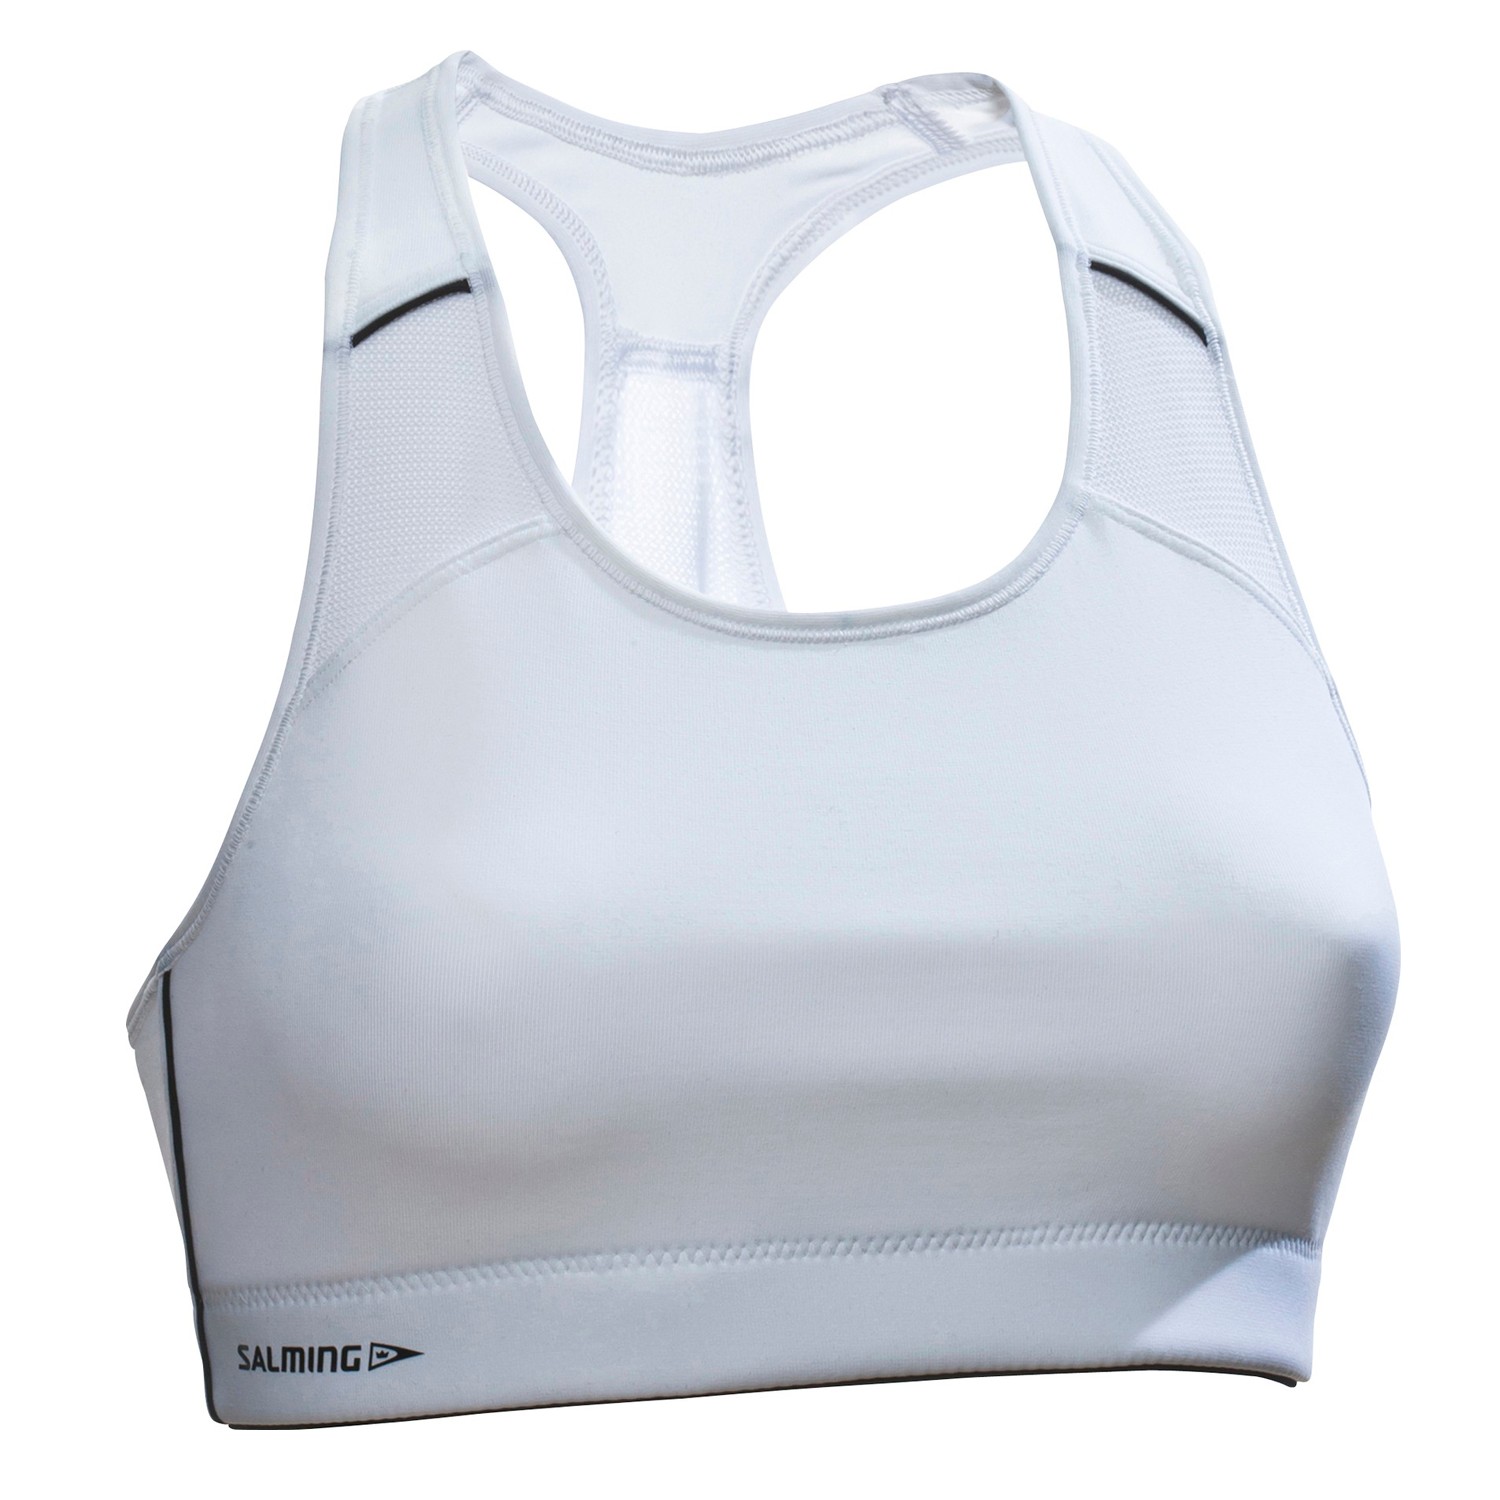 Salming Activity Sport Top White